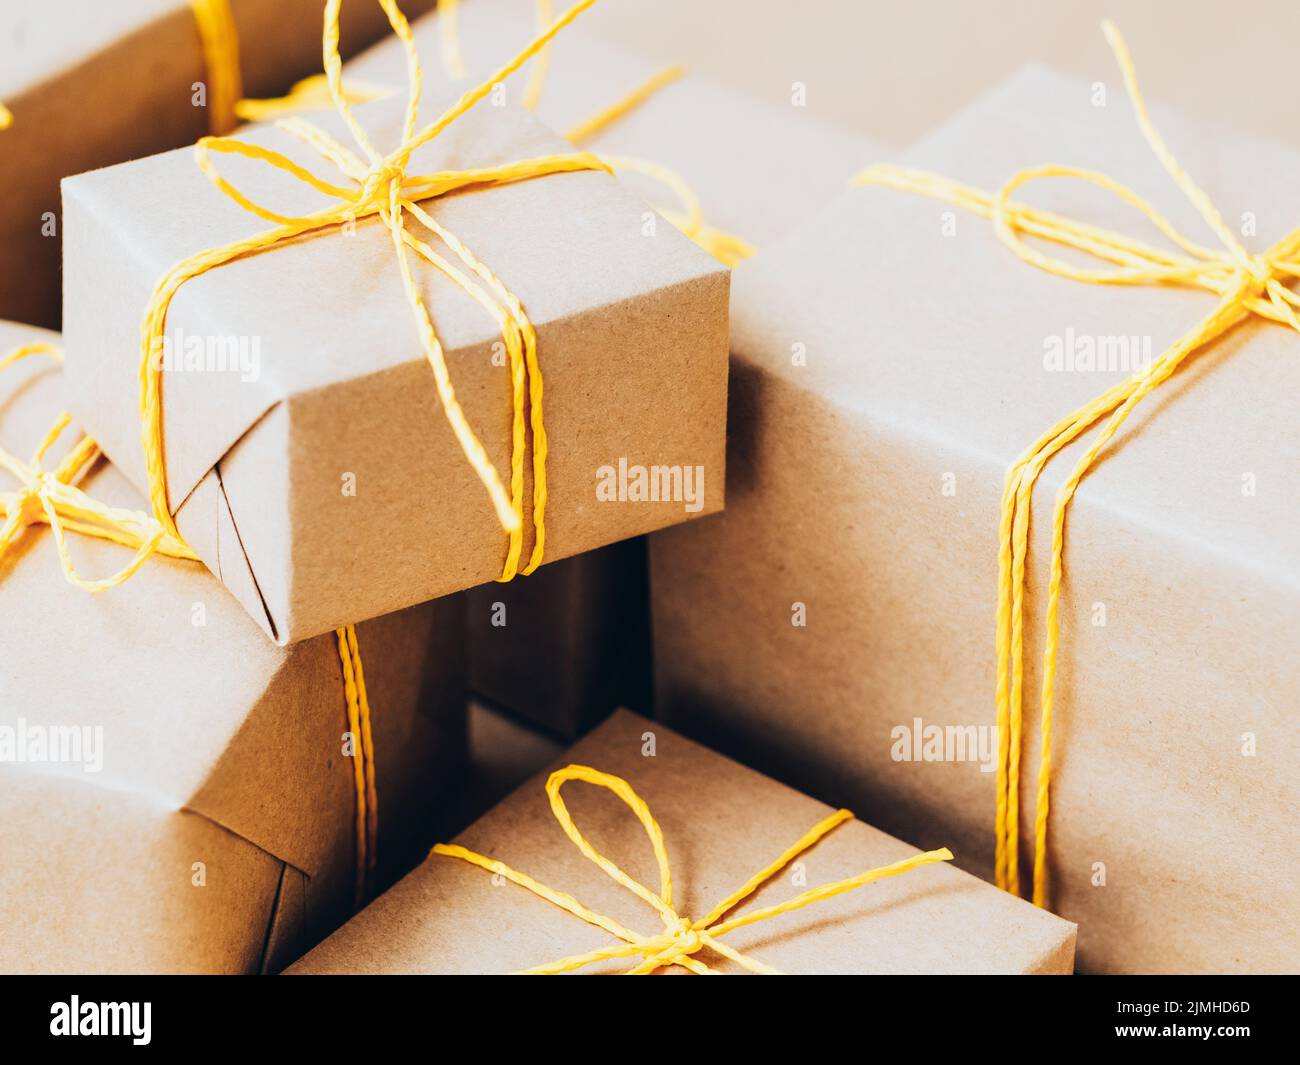 online shopping sale pile beige boxes yellow cord Stock Photo